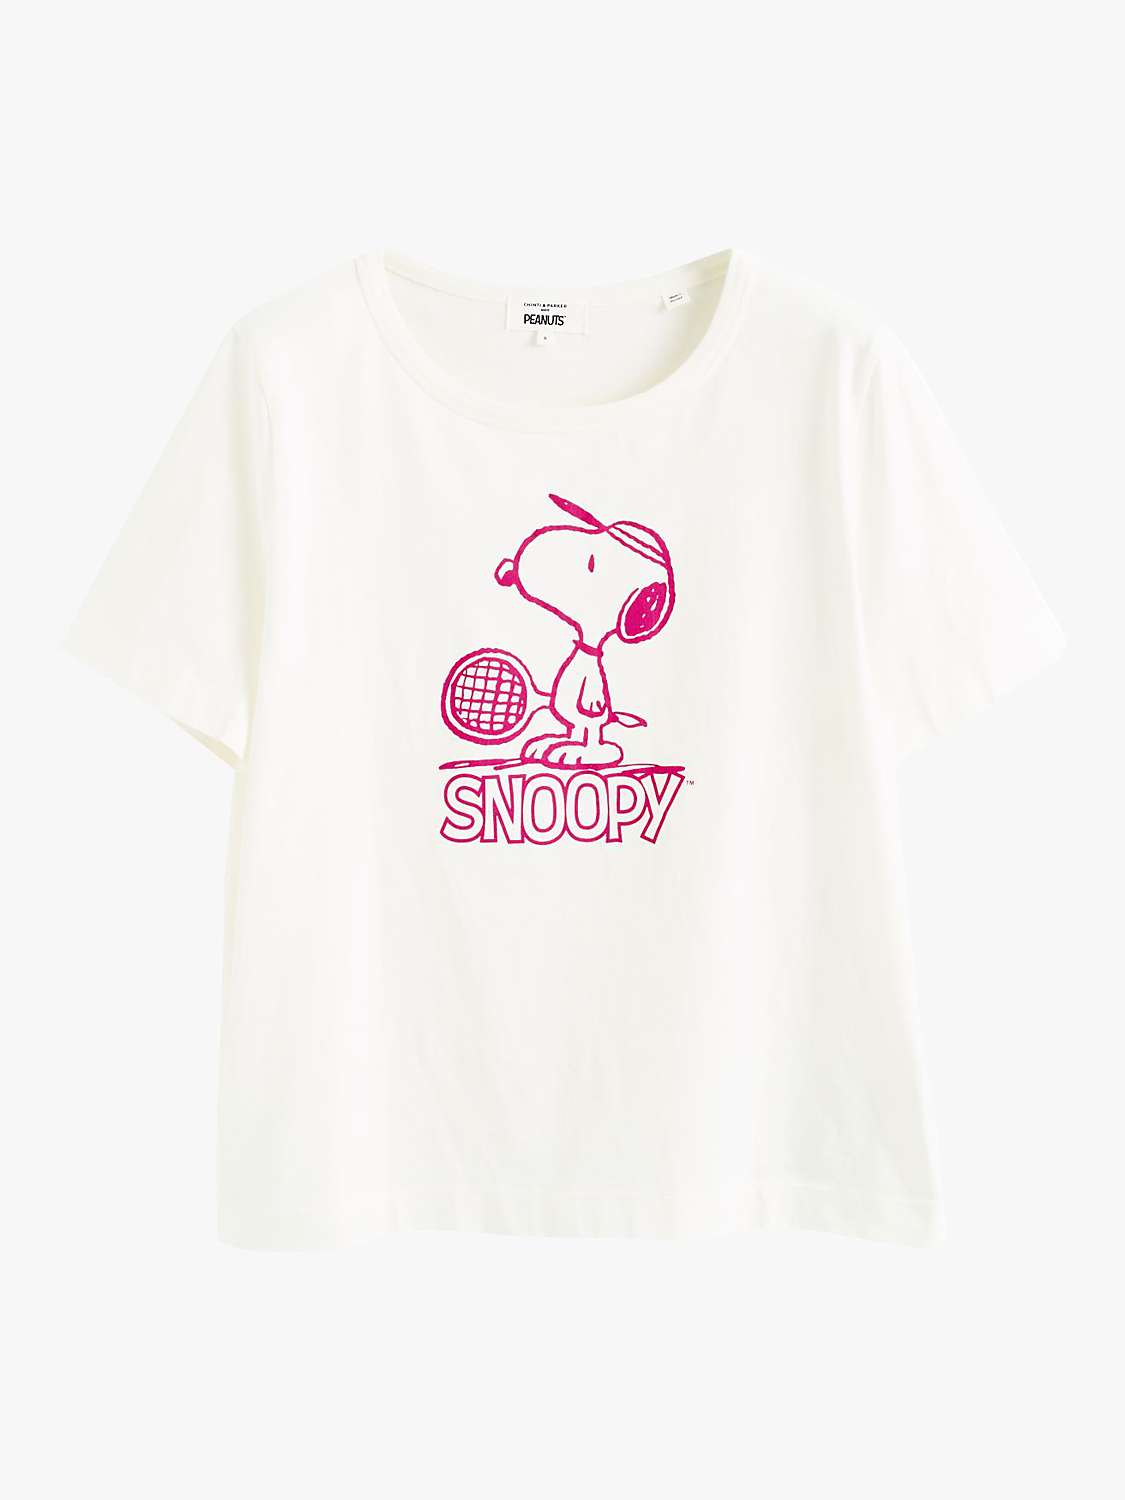 Buy Chinti & Parker Retro Snoopy T-Shirt, Cream/Berry Pink Online at johnlewis.com